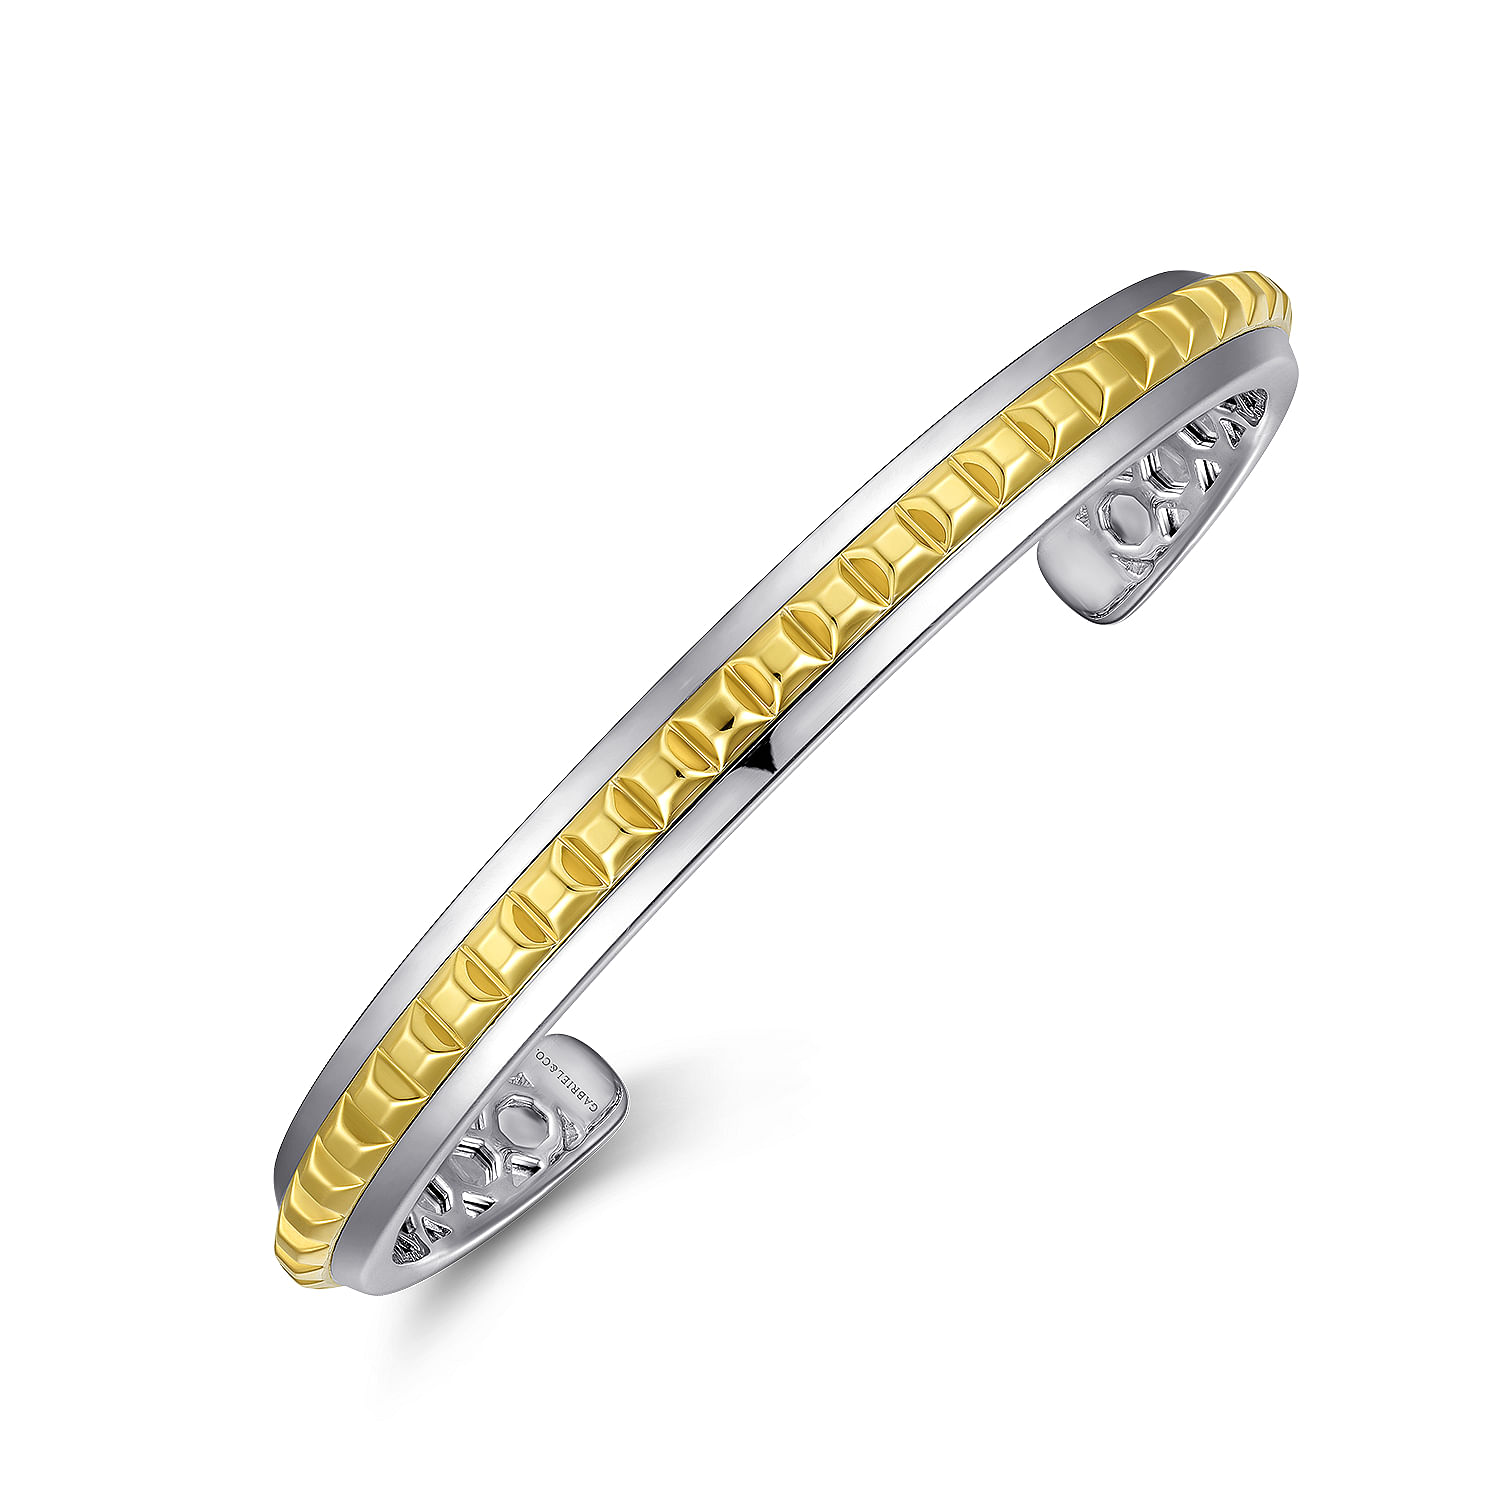 Sterling Silver Open Cuff Bracelet with 14K Yellow Gold Grommets